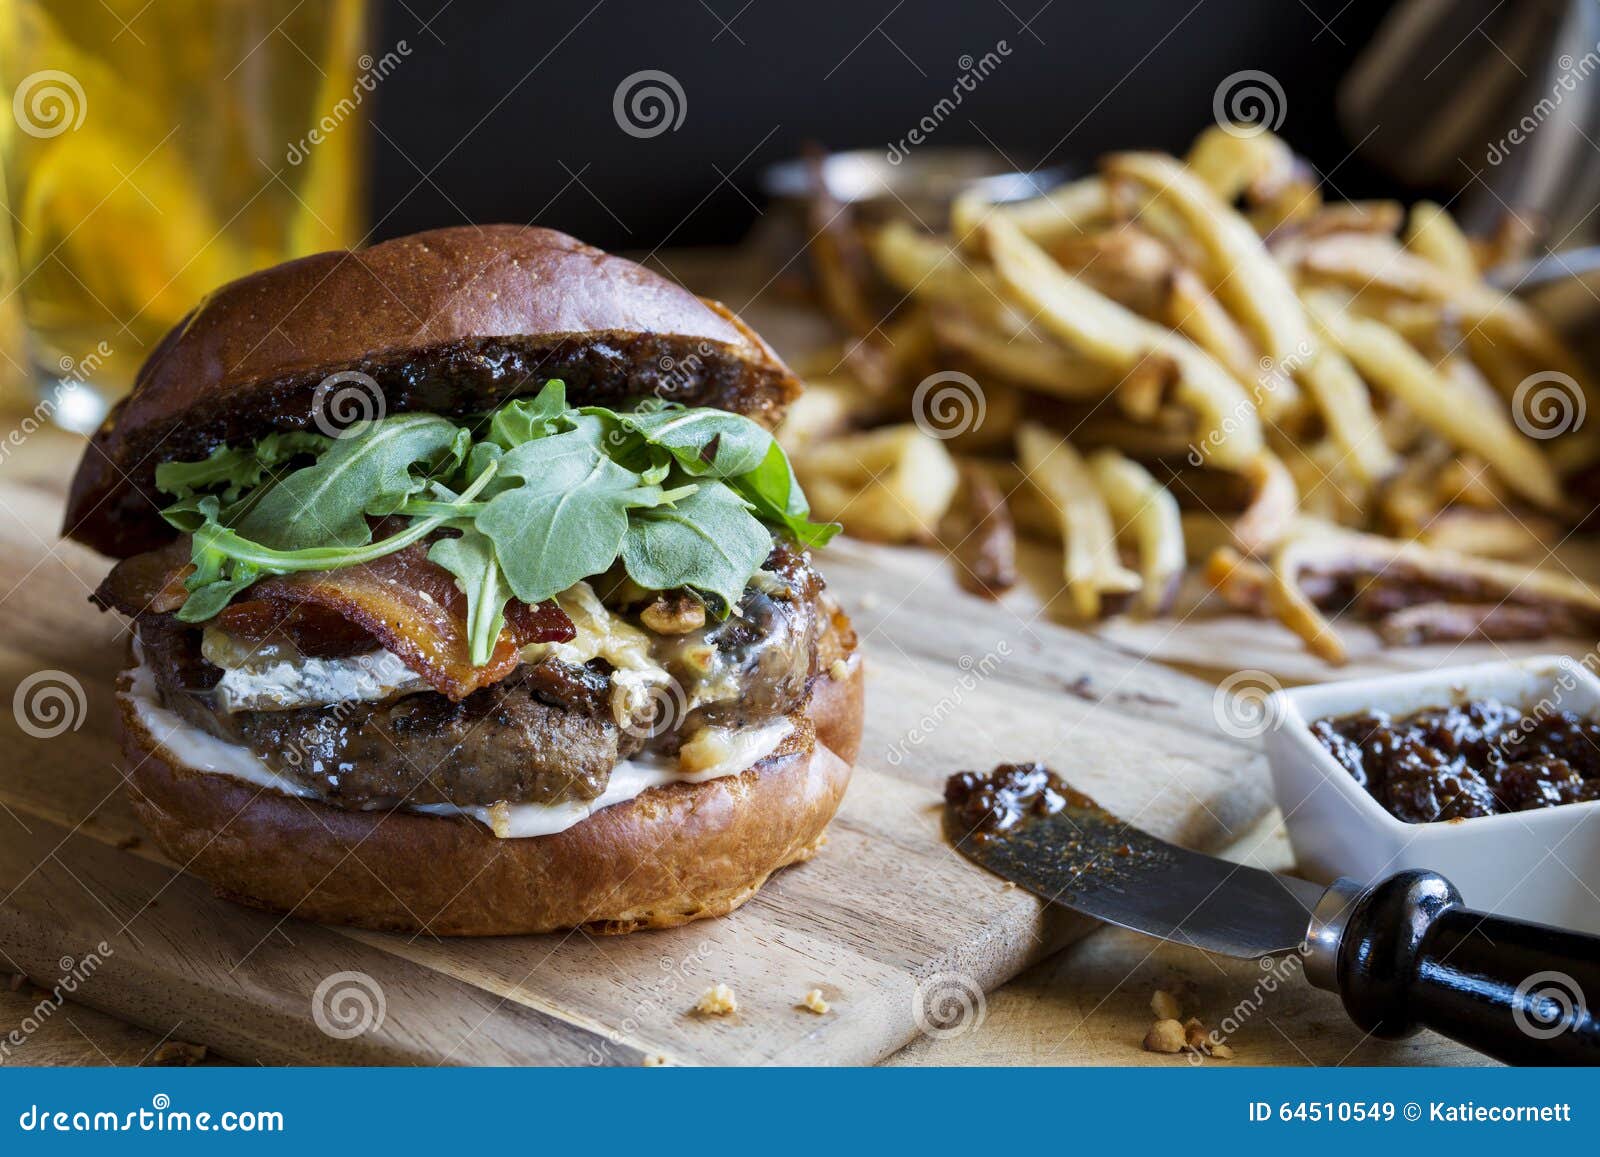 gourmet hamburger with fig jam and french fries